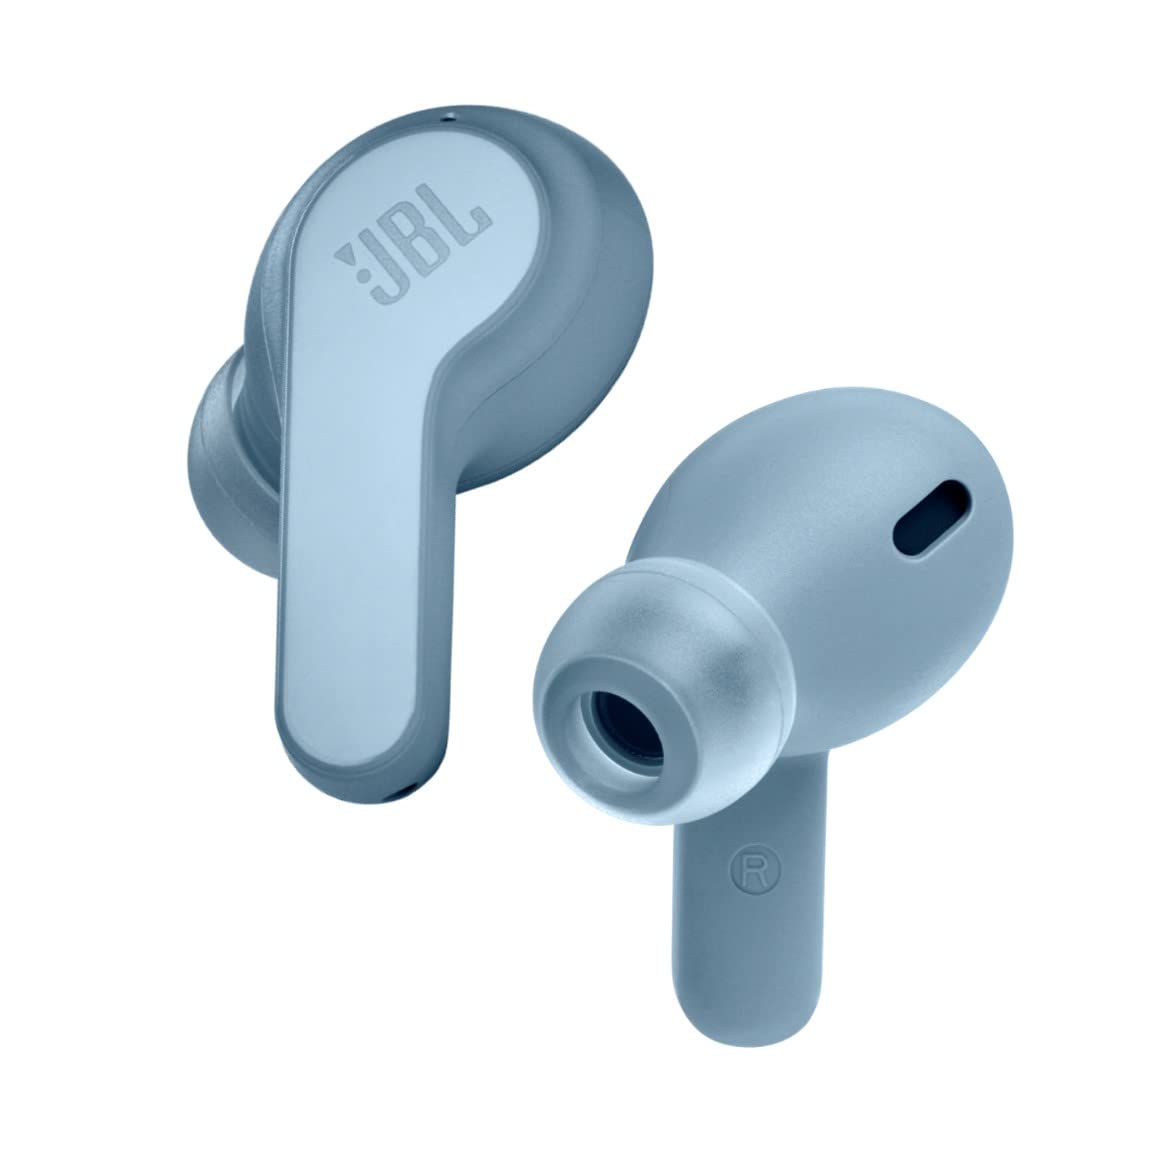 JBL Wave 200 TWS, True Wireless in-Ear Earbuds with Mic, 20 Hours Playtime, JBL Deep Bass Sound, use Single Earbud or Both, Bluetooth 5.0, Type C & Voice Assistant Support for Mobile Phones (Blue)